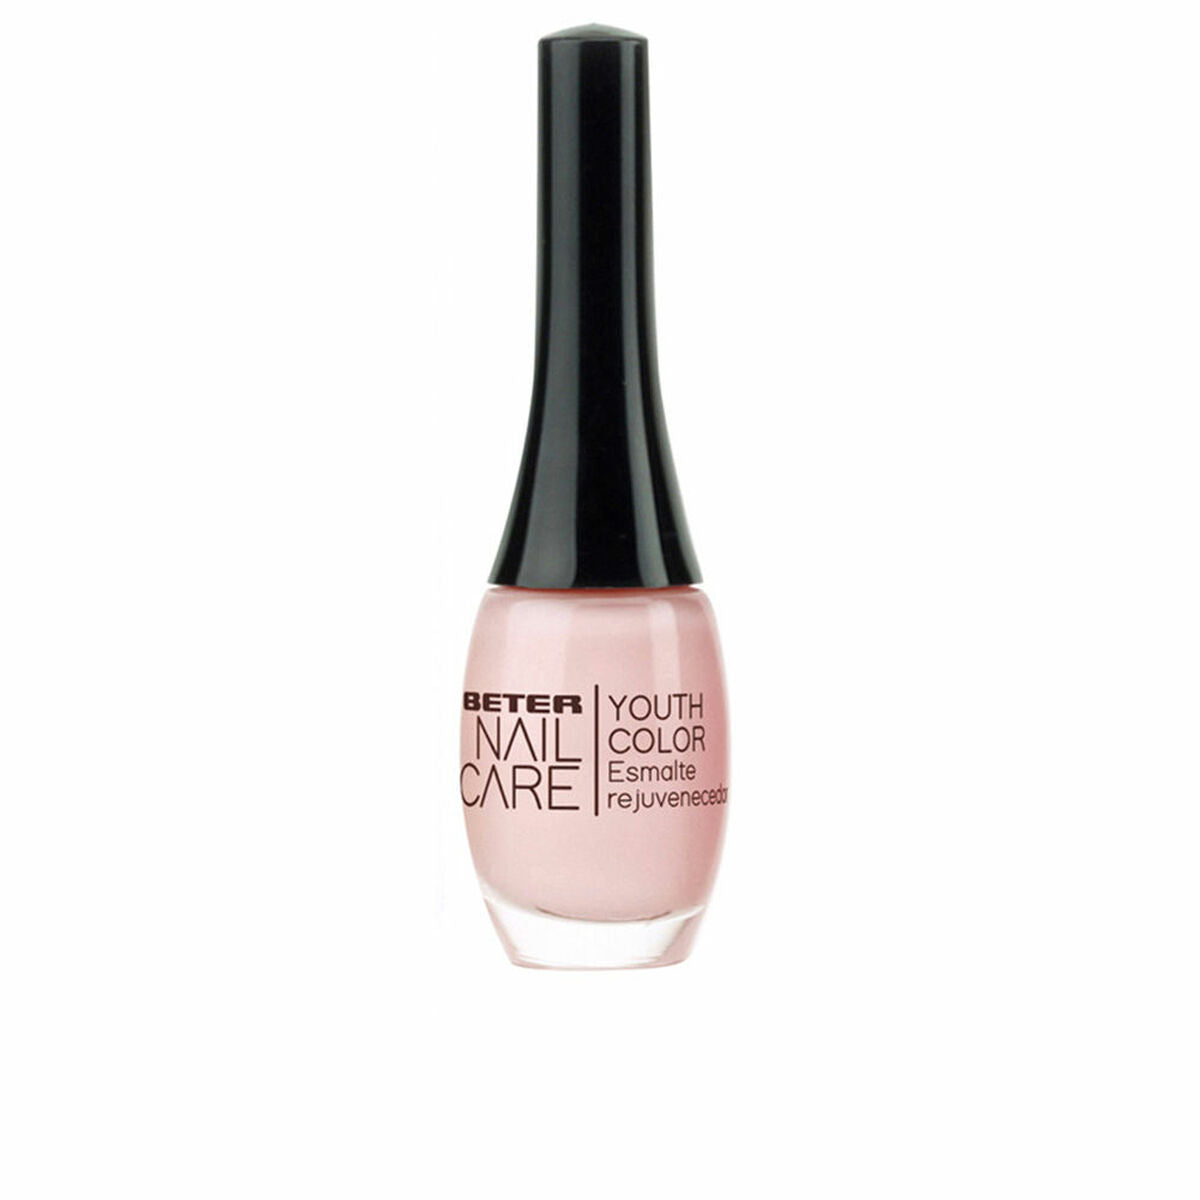 Nail polish Beter Nail Care Youth Color Nº 031 Rosewater 11 ml - Calm Beauty IE